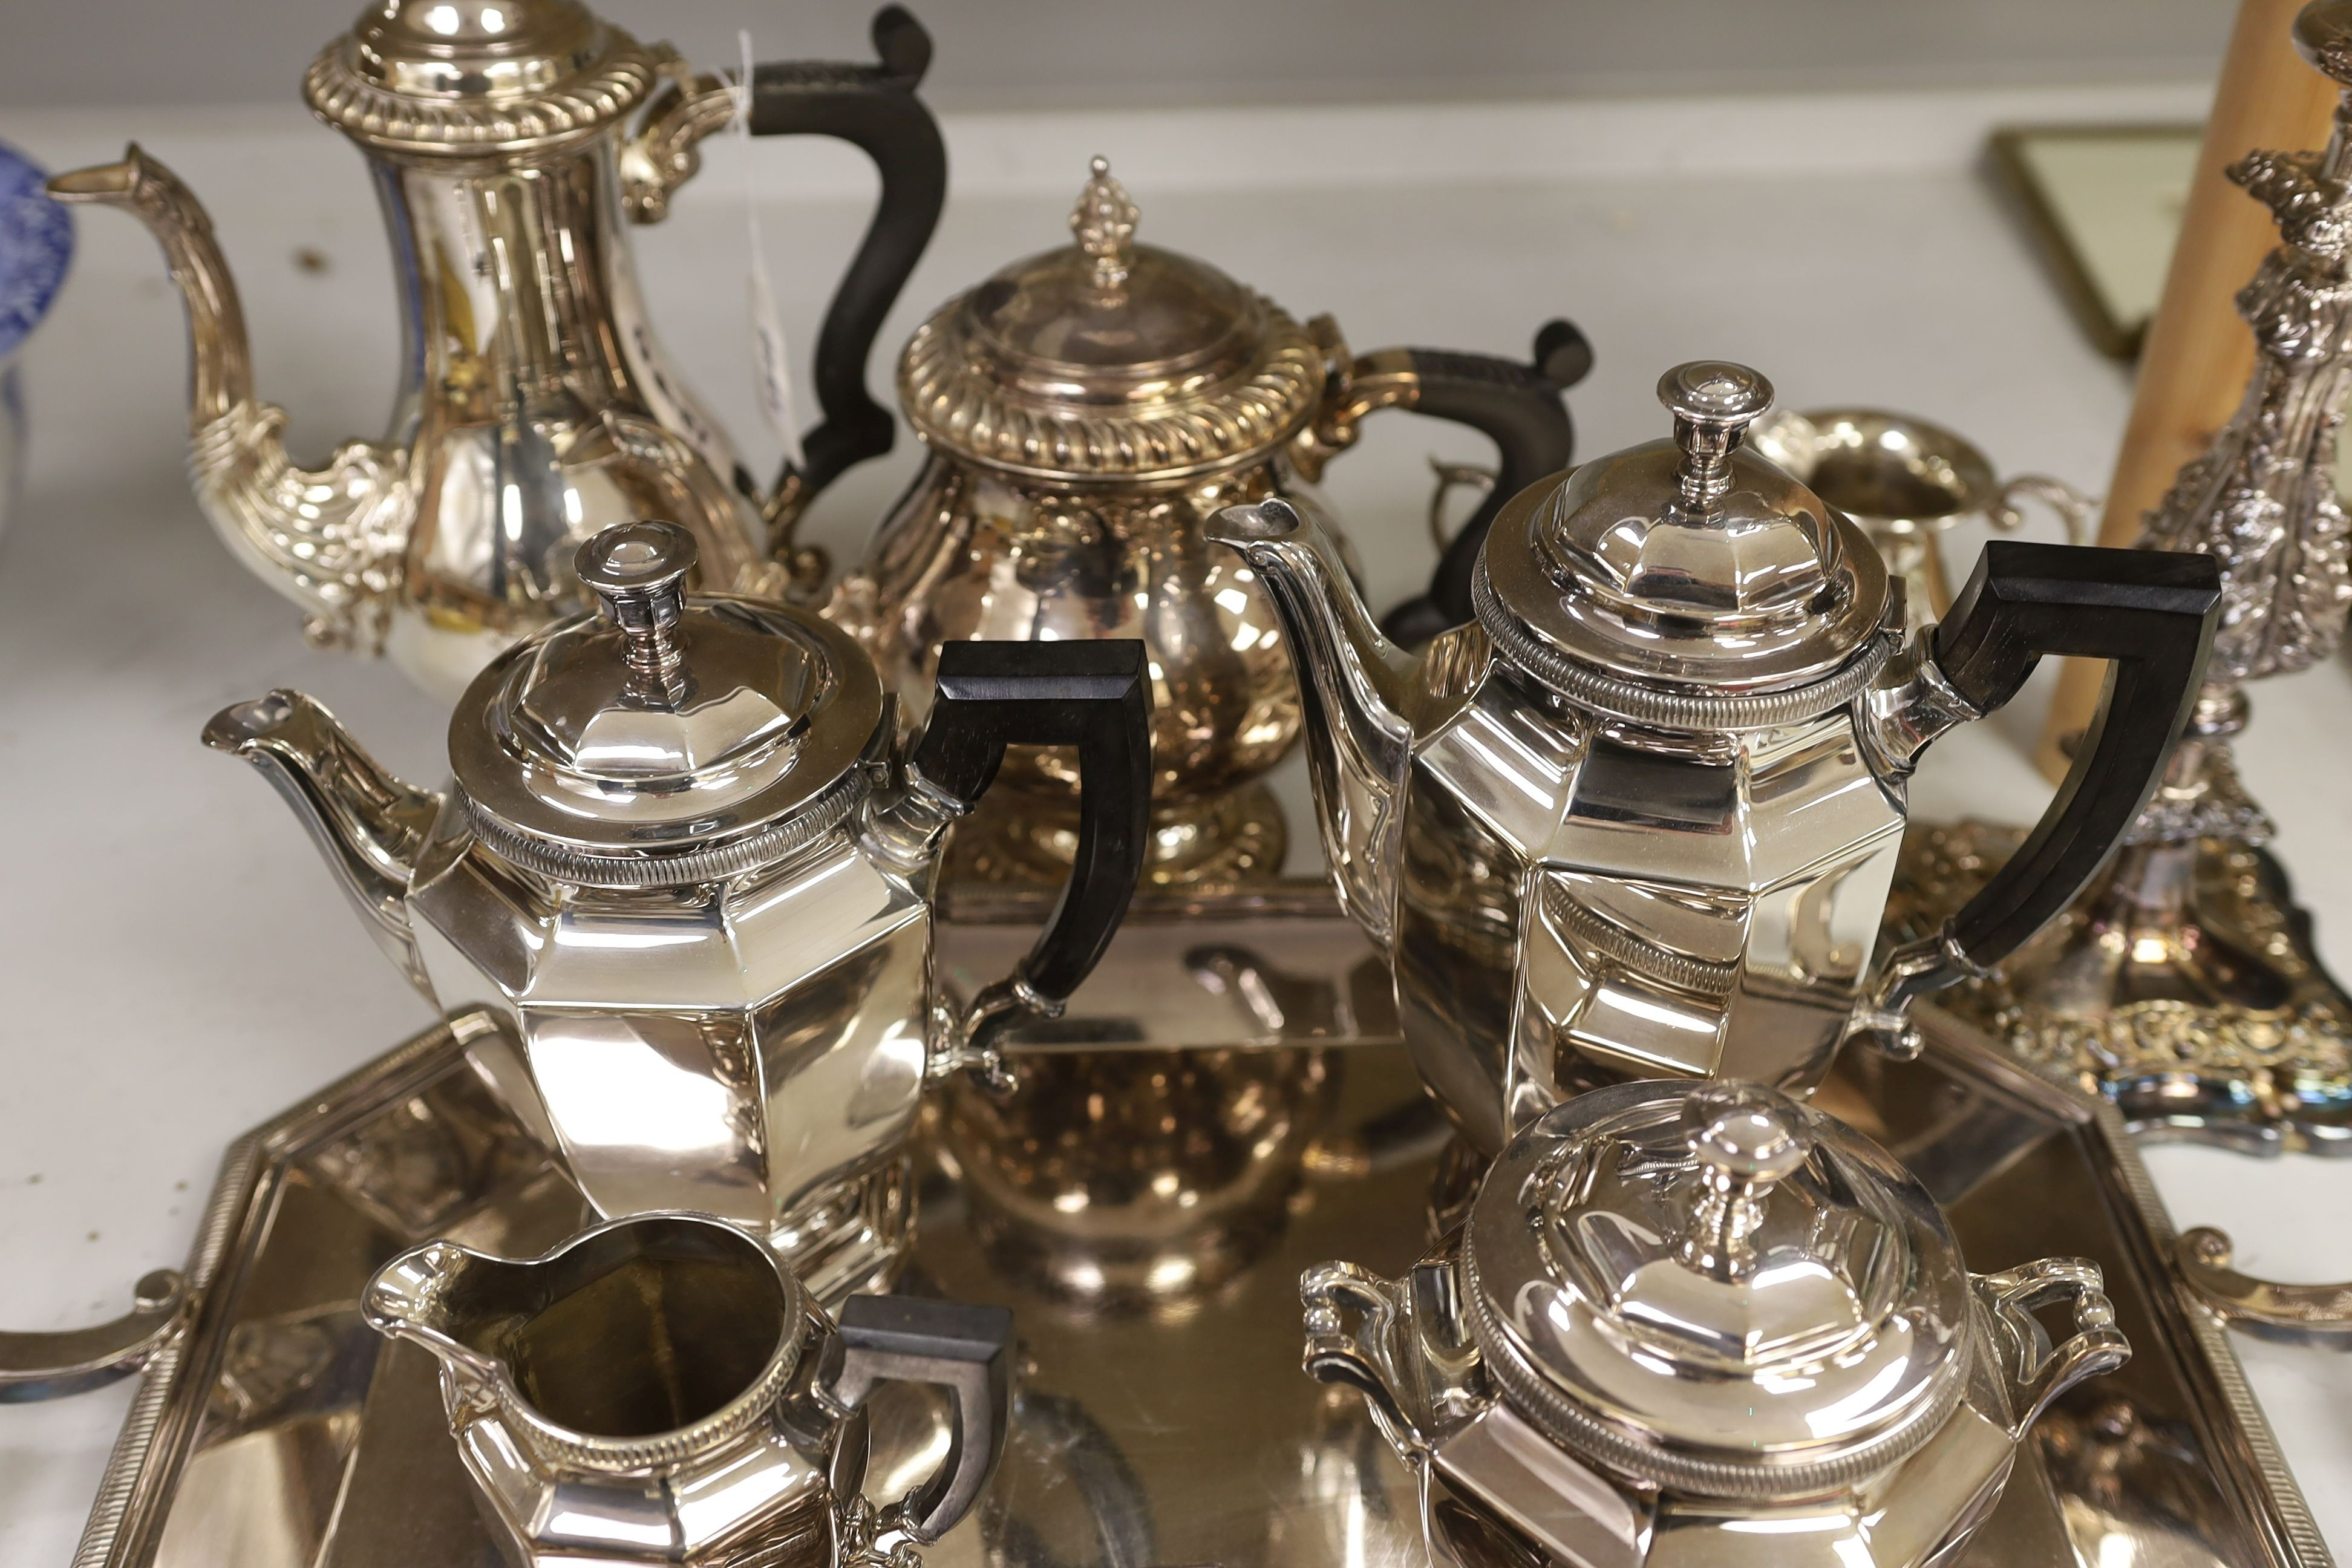 A French plated Cristofle tea set, together with other plated tea wares and a candelabrum - Image 5 of 7